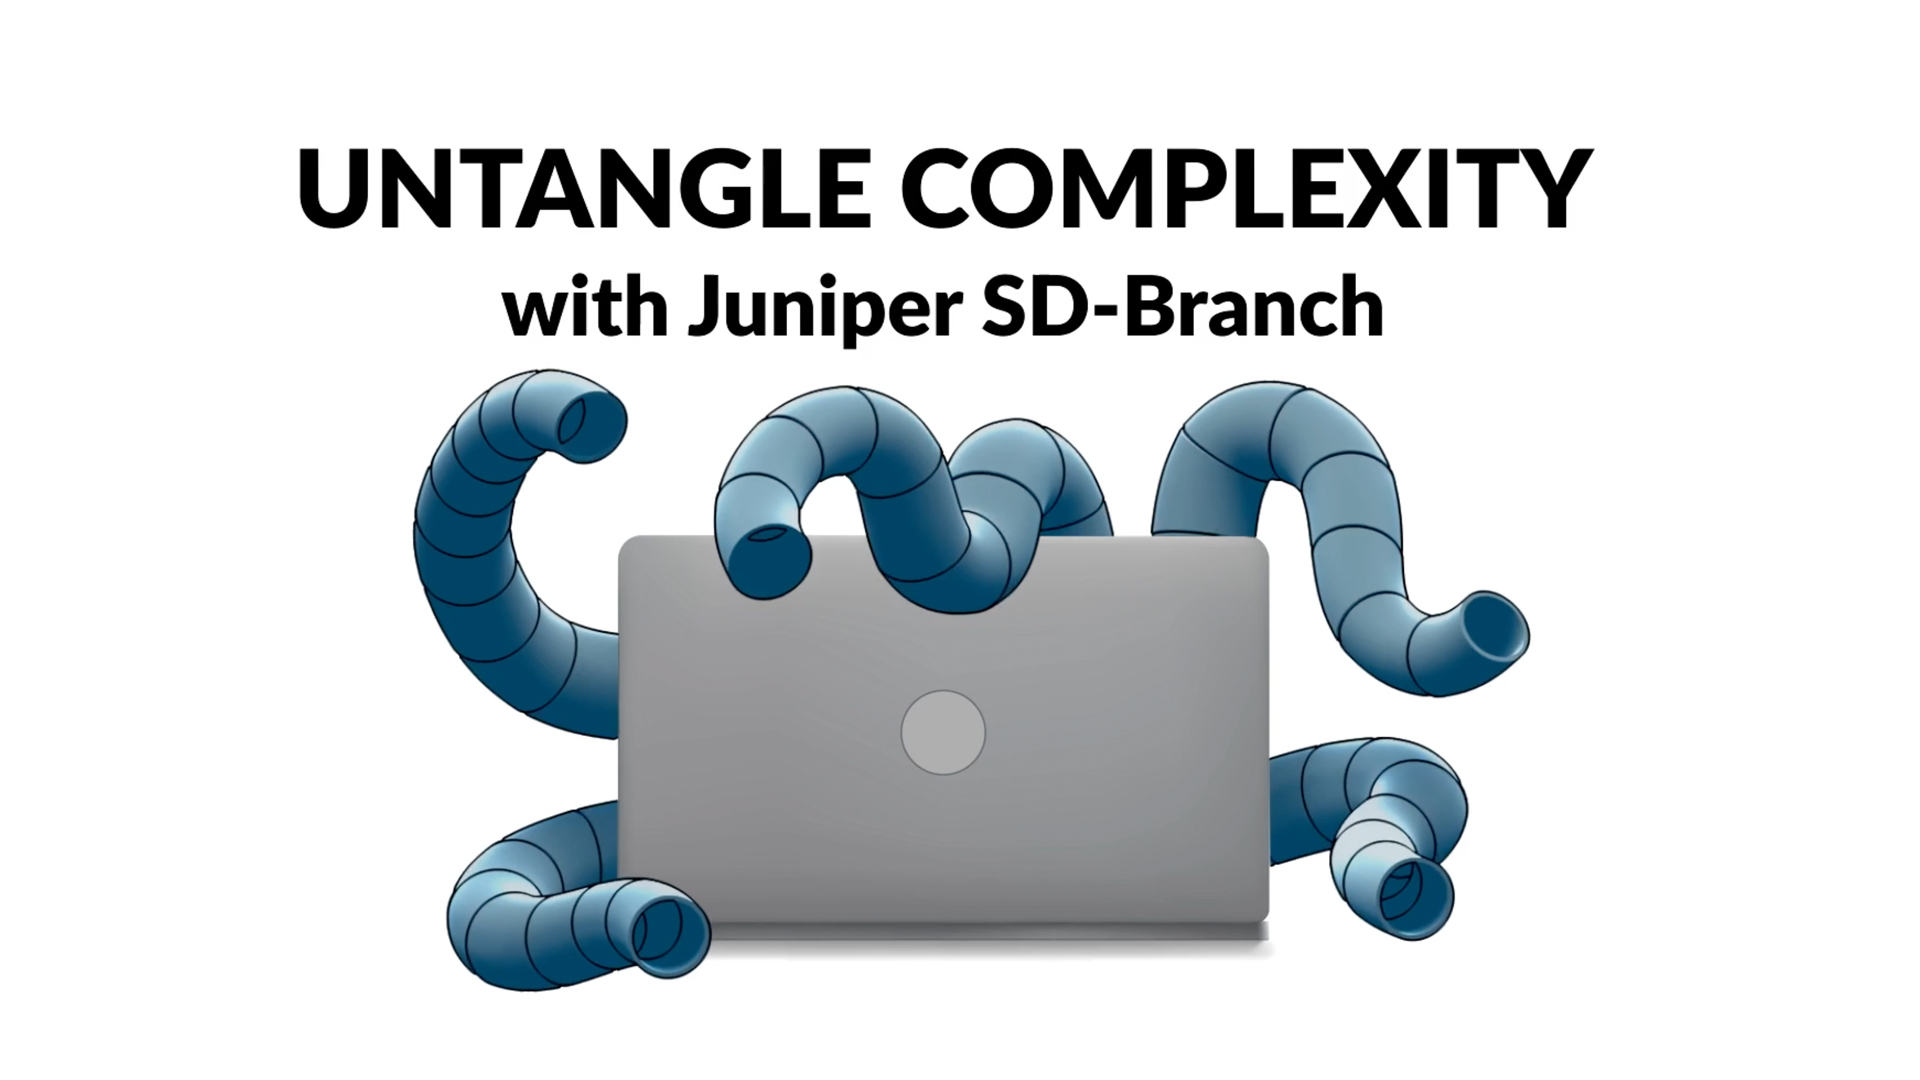 Images from our Juniper SD-Wan animated video series. The image shows comic like tentacles coming out of a laptop with the text Untangle Complexity with Juniper SD-Branch above it.